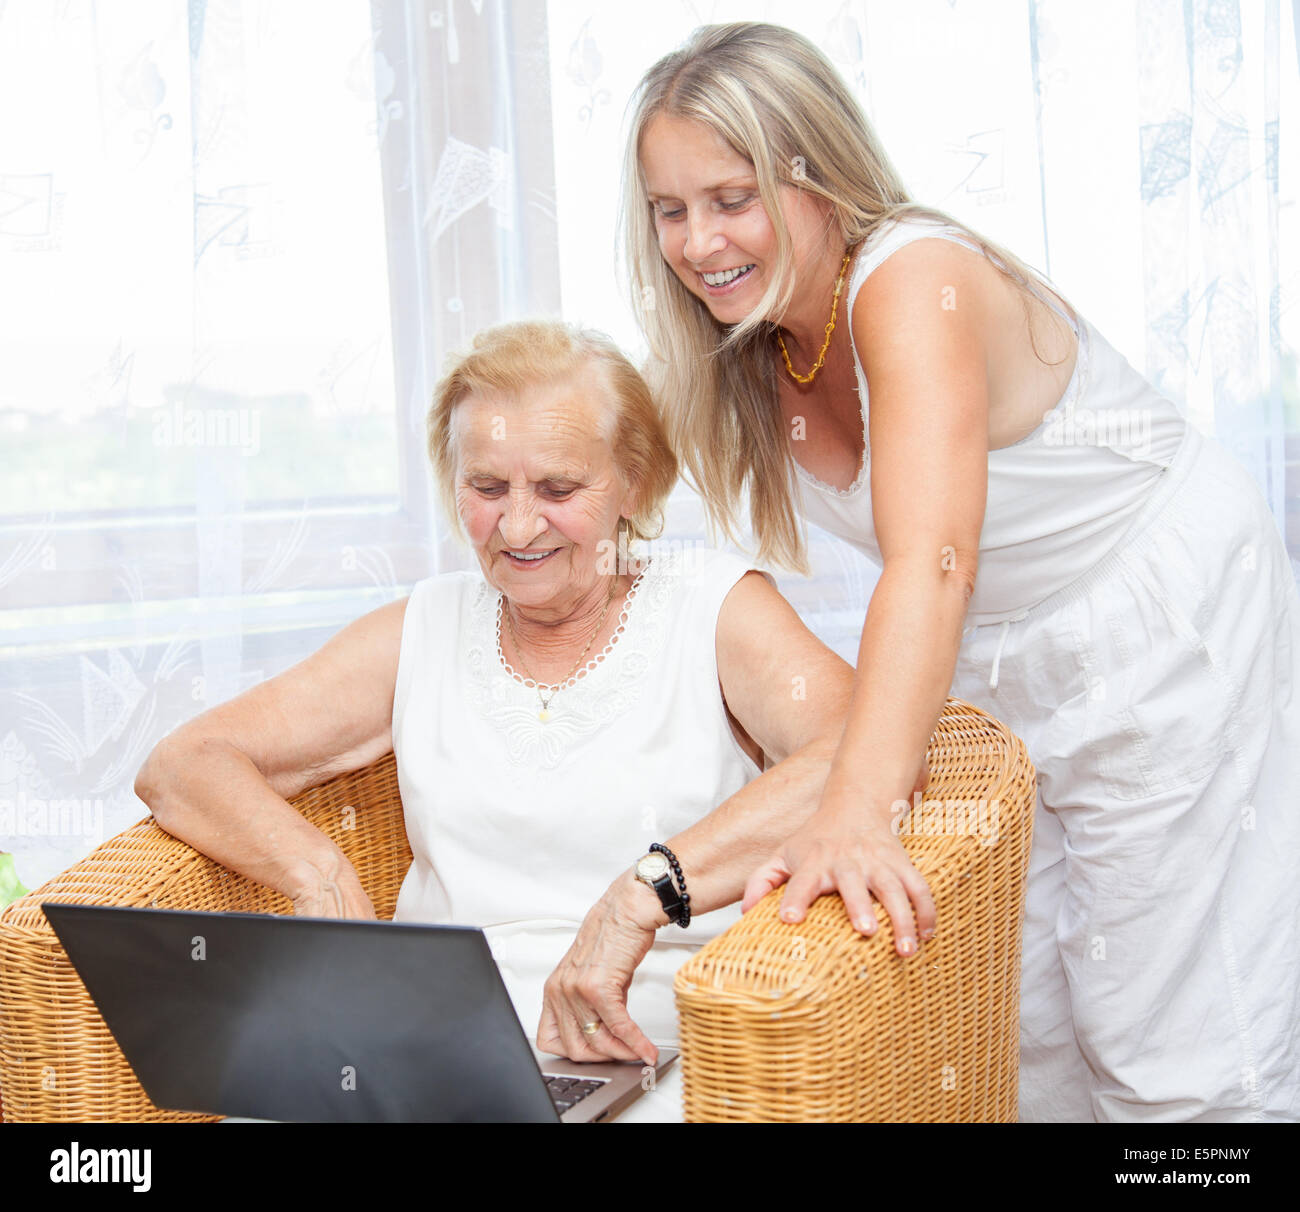 Helping out elderly with new technology Stock Photo